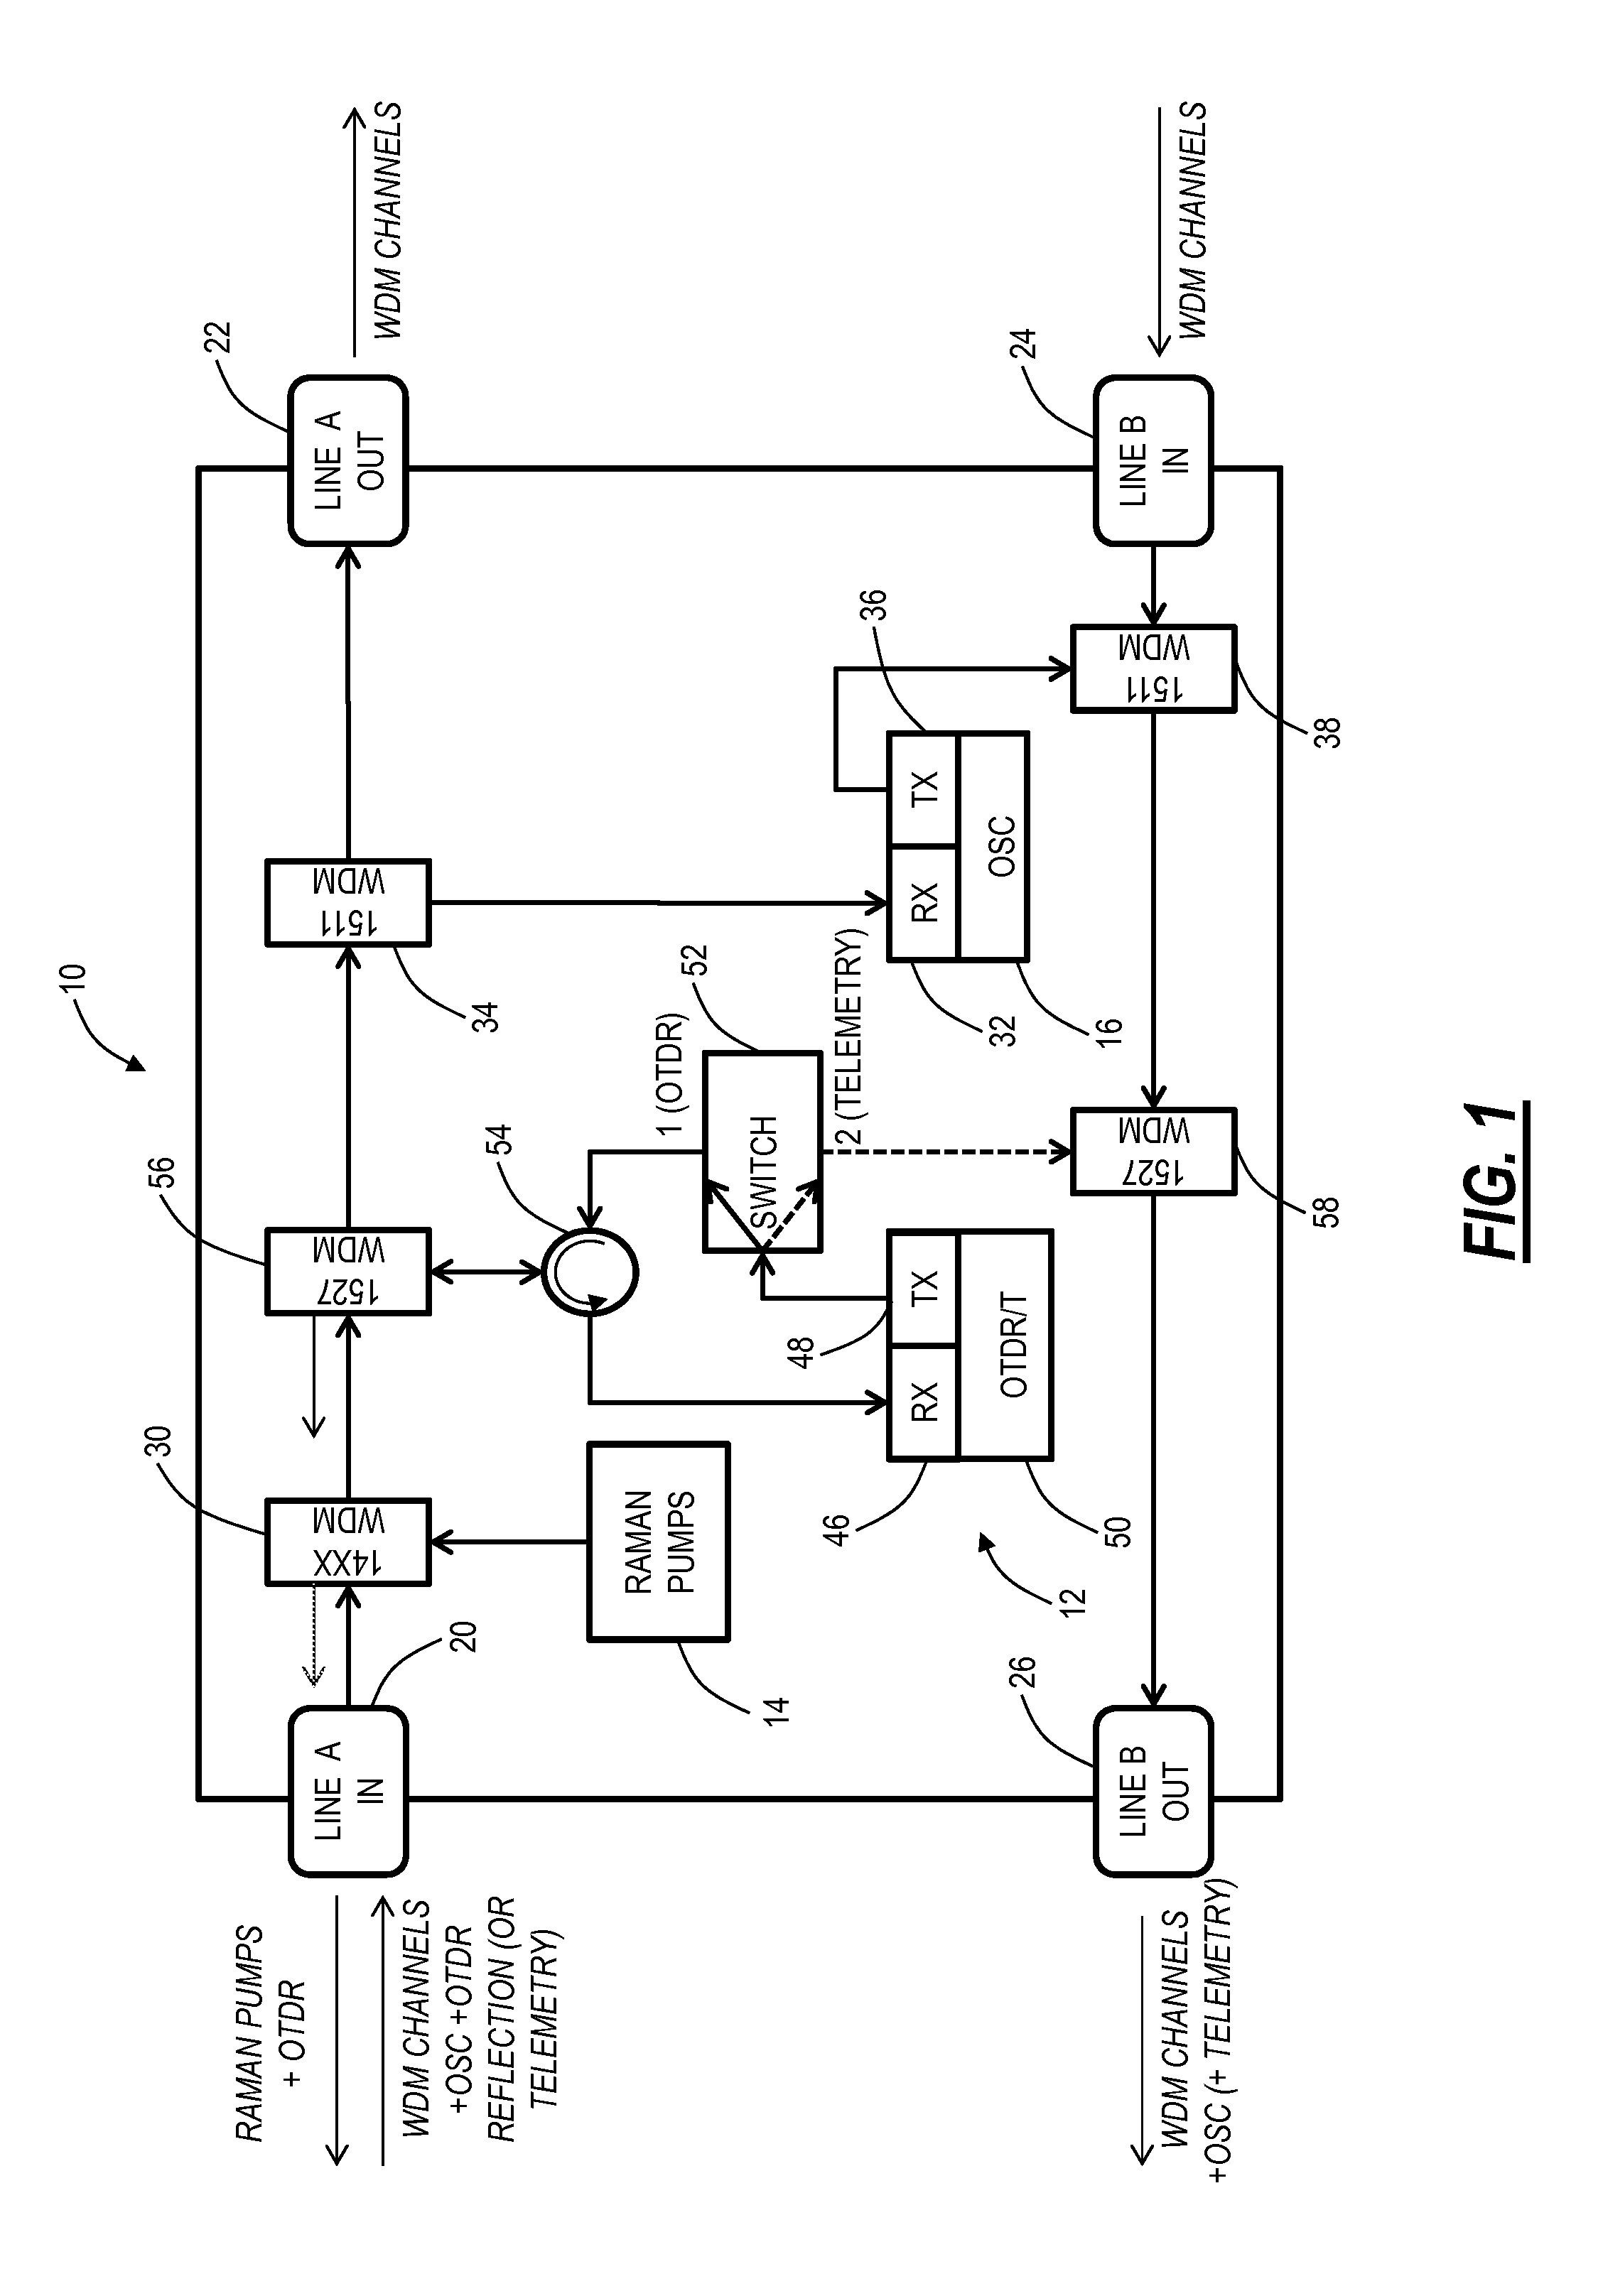 Raman amplifier system and method with integrated optical time domain reflectometer